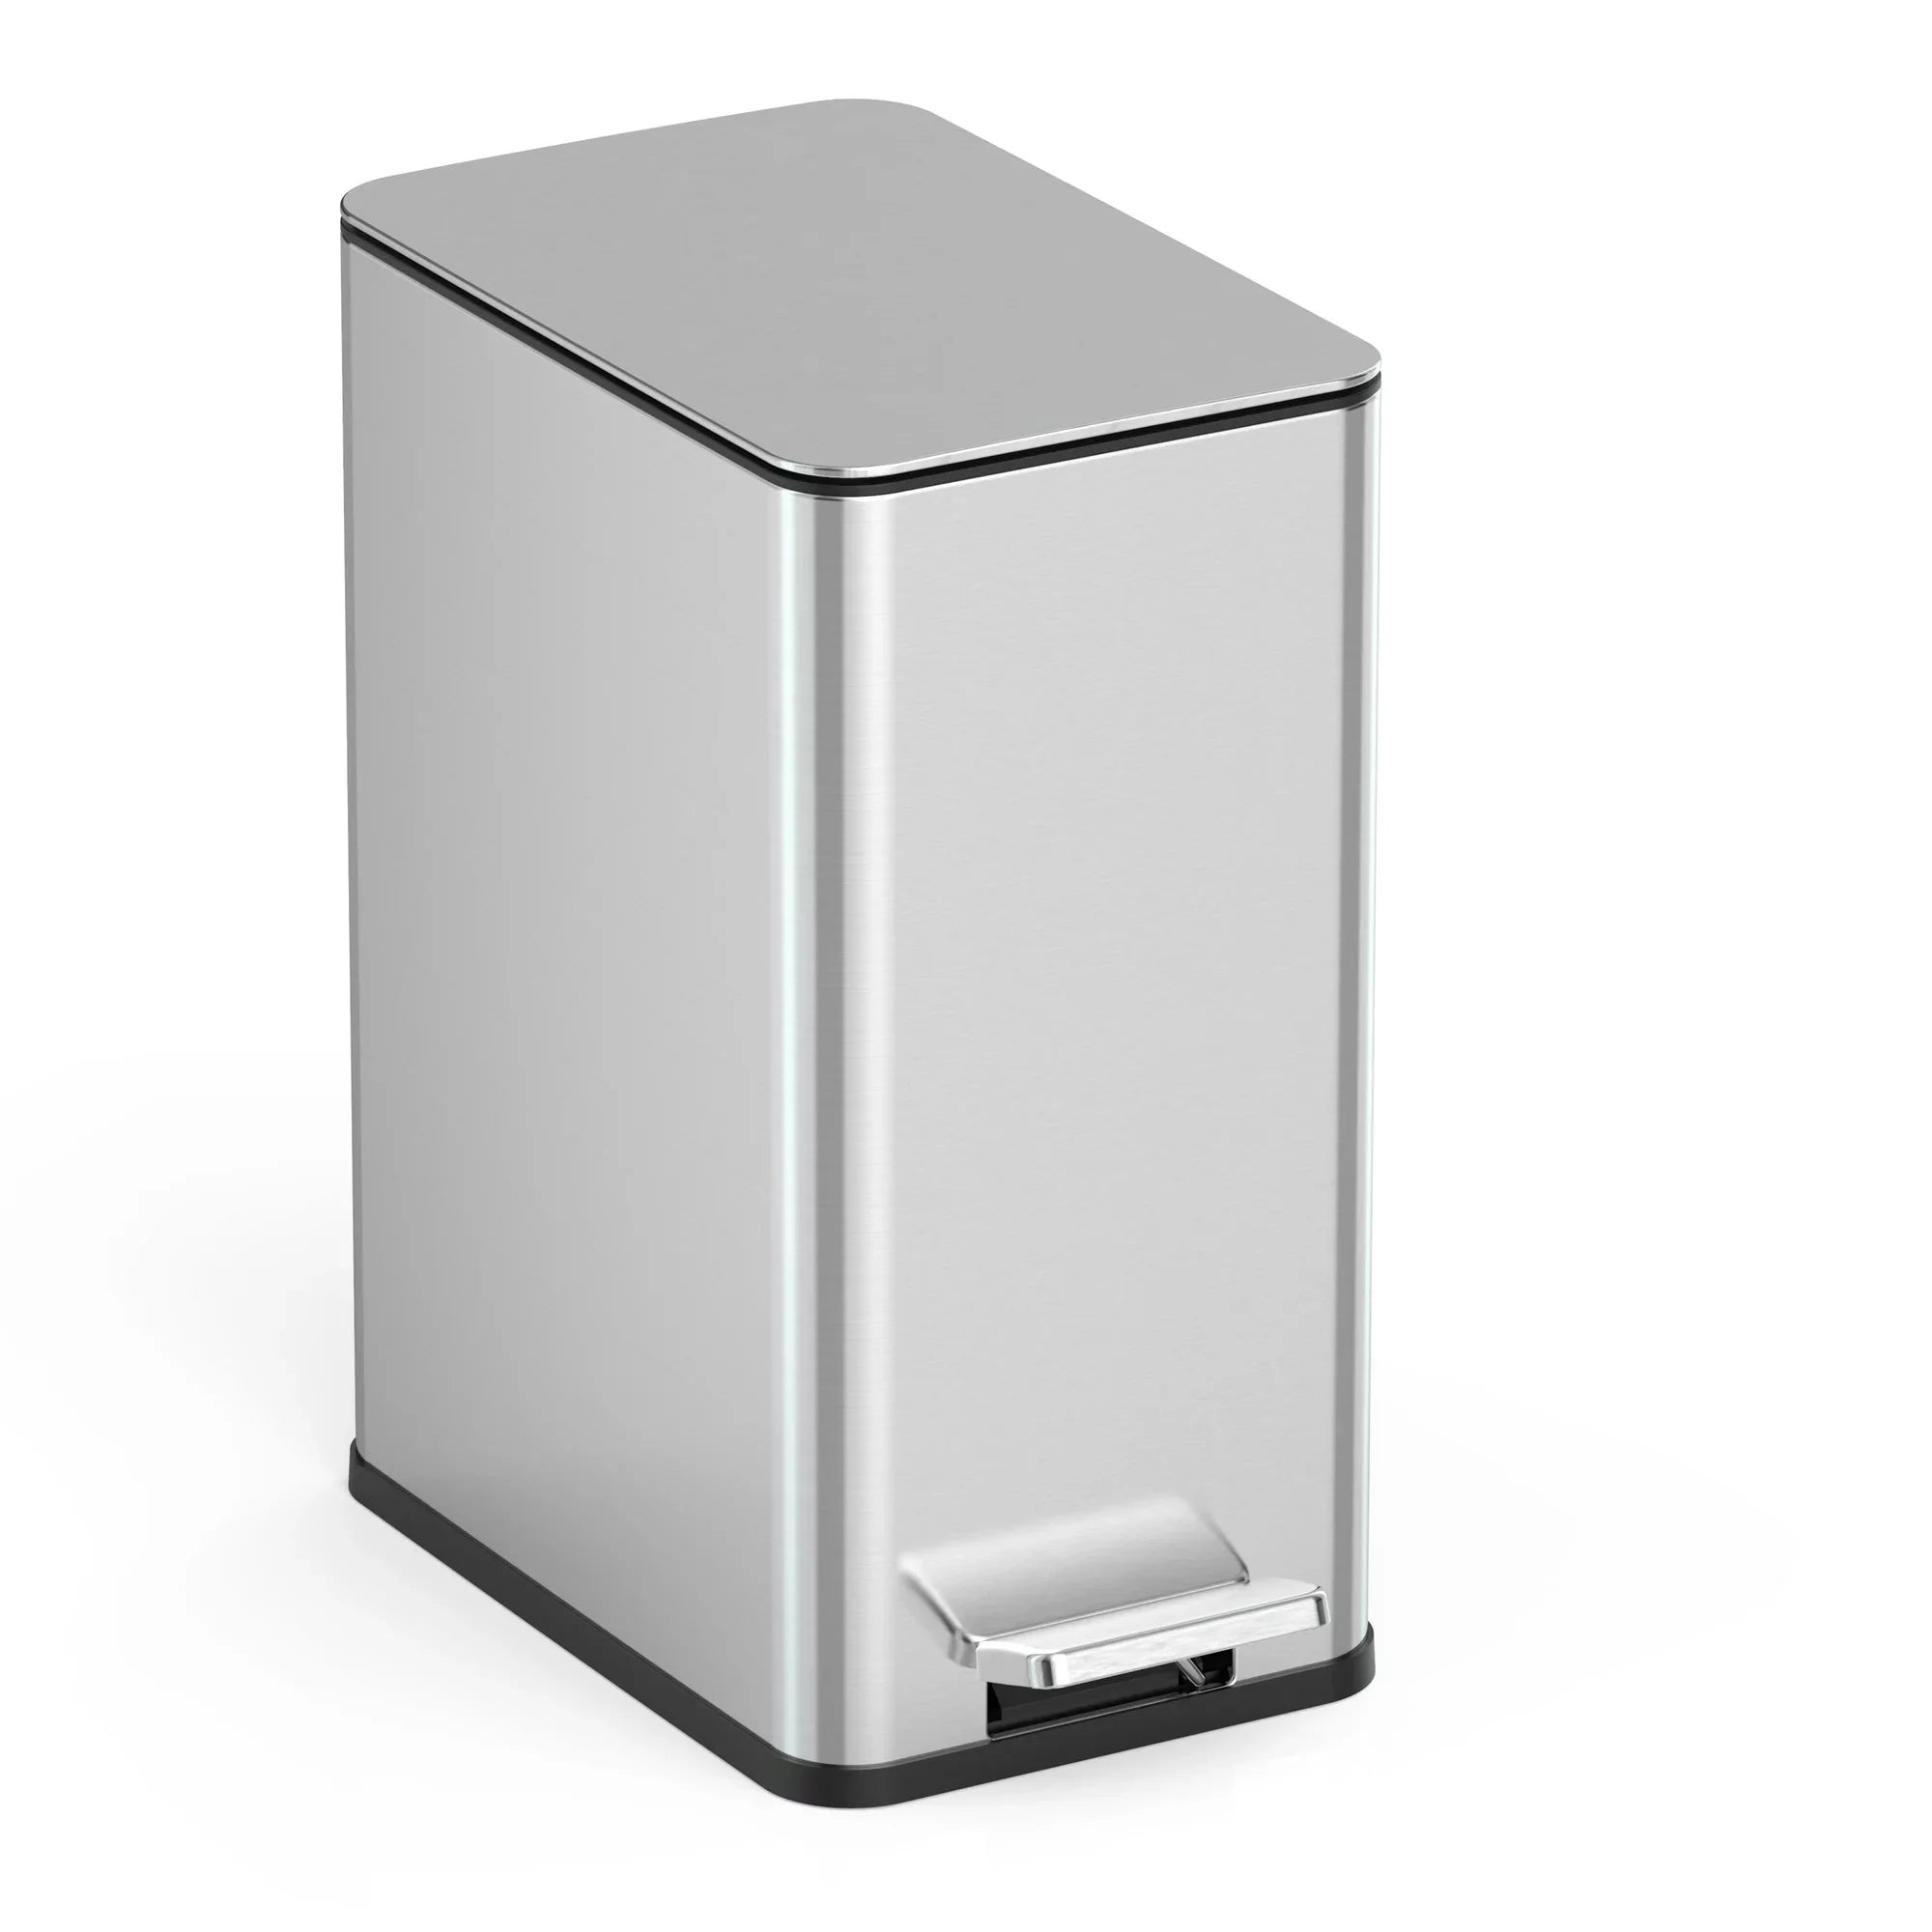 Wholesale prices with free shipping all over United States Nine Stars 2.6 Gallon Trash Can, Slim Step On Bathroom Trash Can, Stainless Steel - Steven Deals